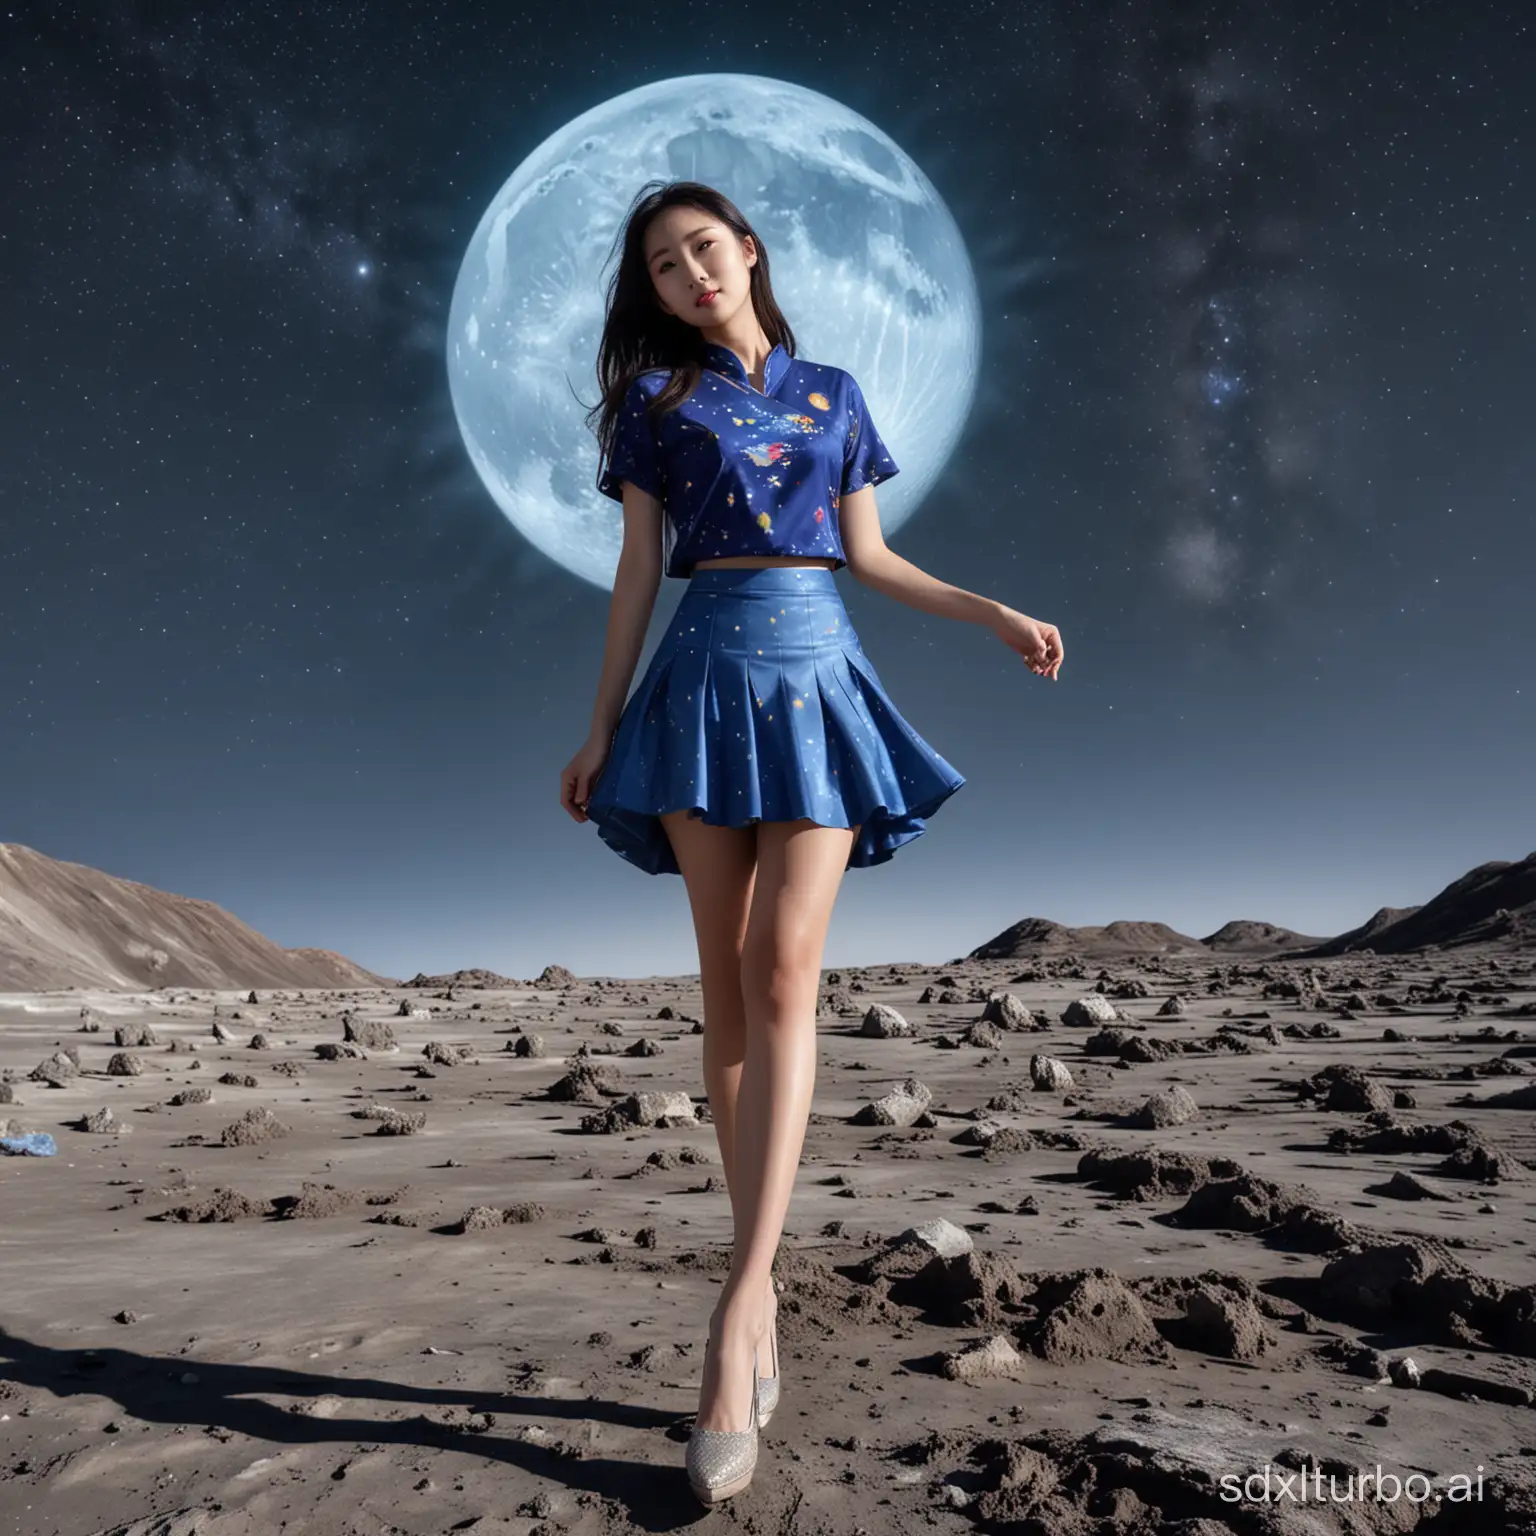 A Chinese woman, 25 years old, wearing high heels, a skirt, the whole body, facing the camera, able to see facial features and hair, standing on the surface of the moon, with a blue planet behind her, the Milky Way galaxy looming faintly.